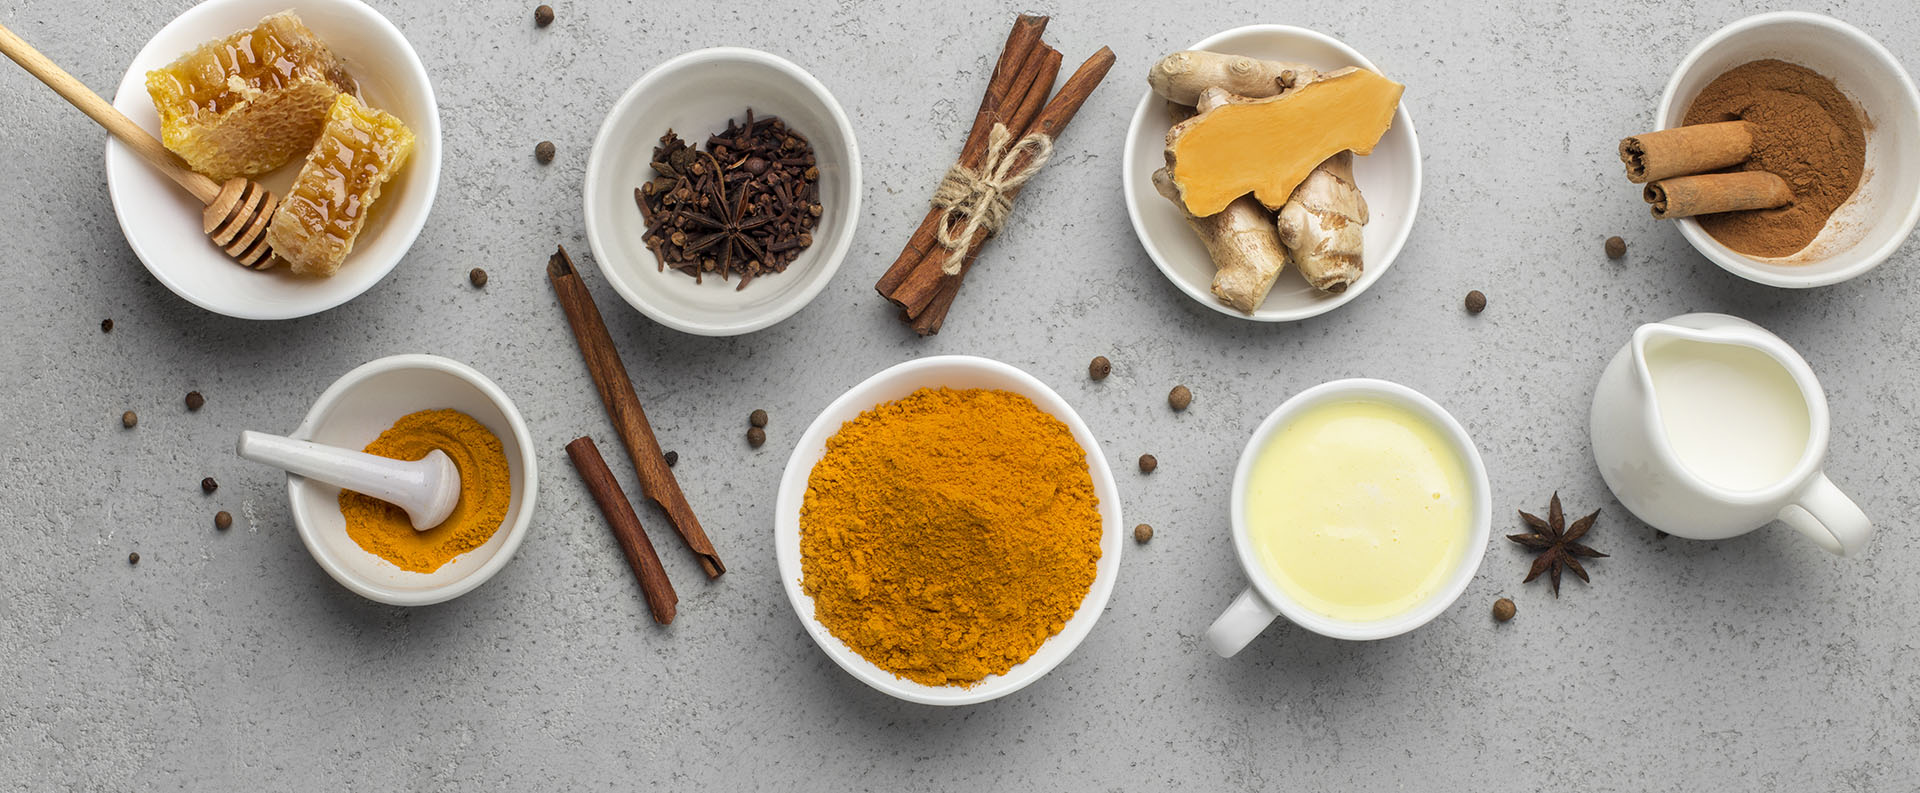 All About Golden Milk; The History, The Ingredients, And How To Make It Yourself